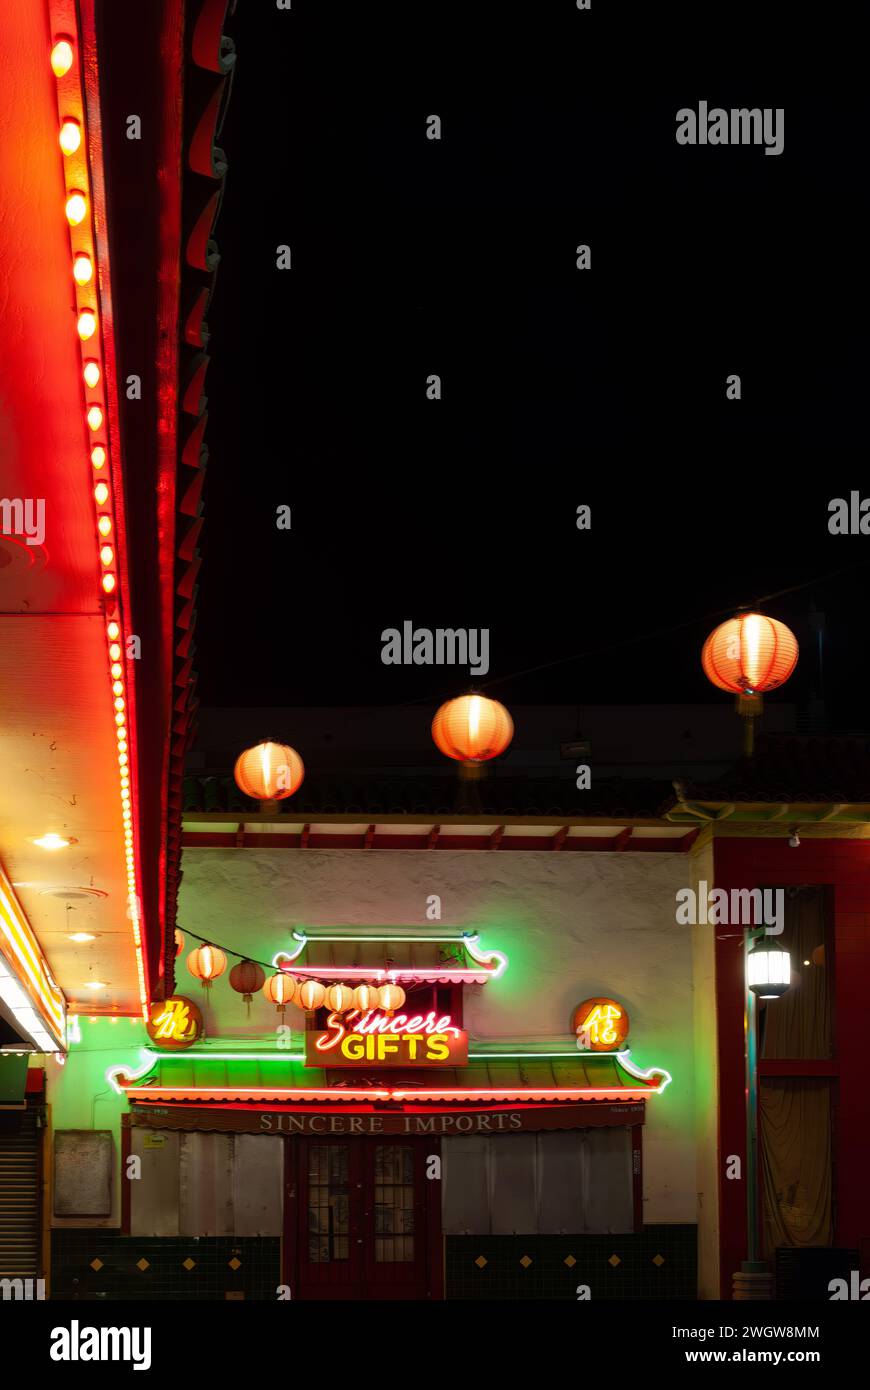 Illuminated building adorned with vibrant red and green signs and lights Stock Photo